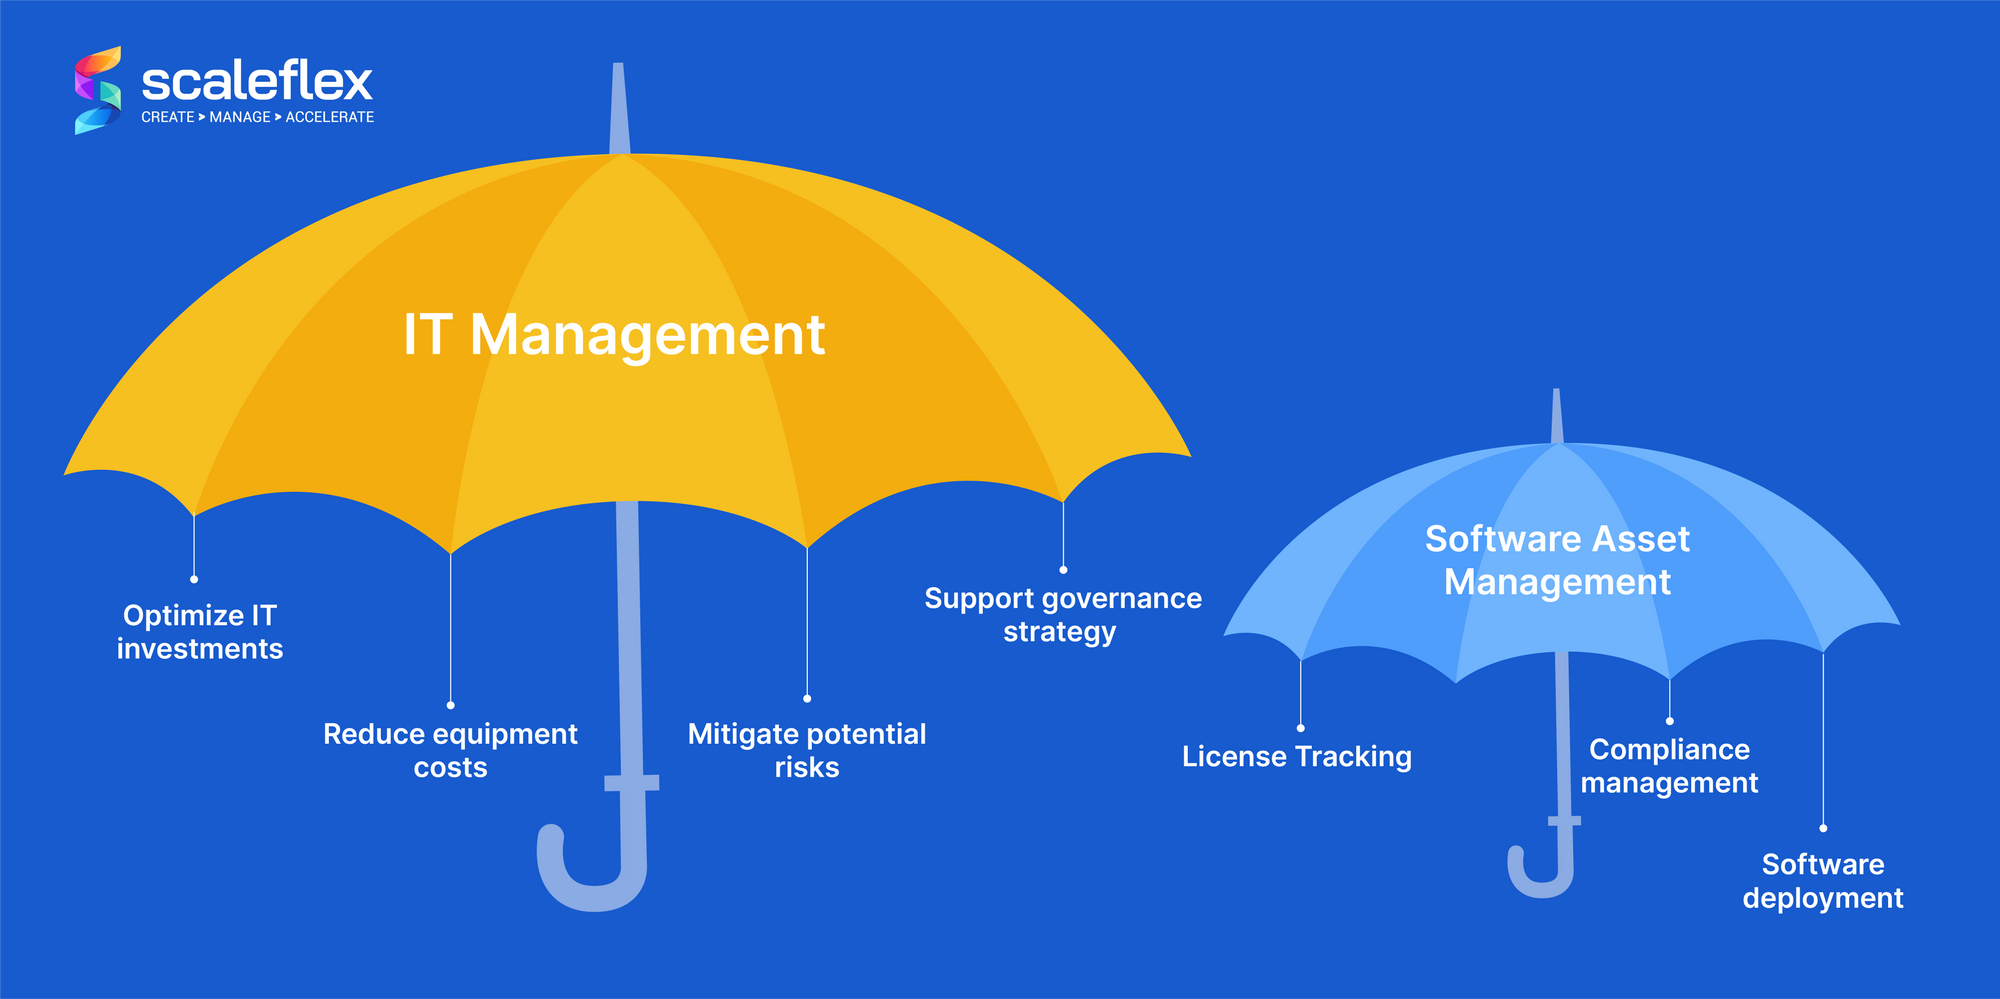 We can see the main differences between an IT Asset Management system and a more specialised Software Asset Management one.